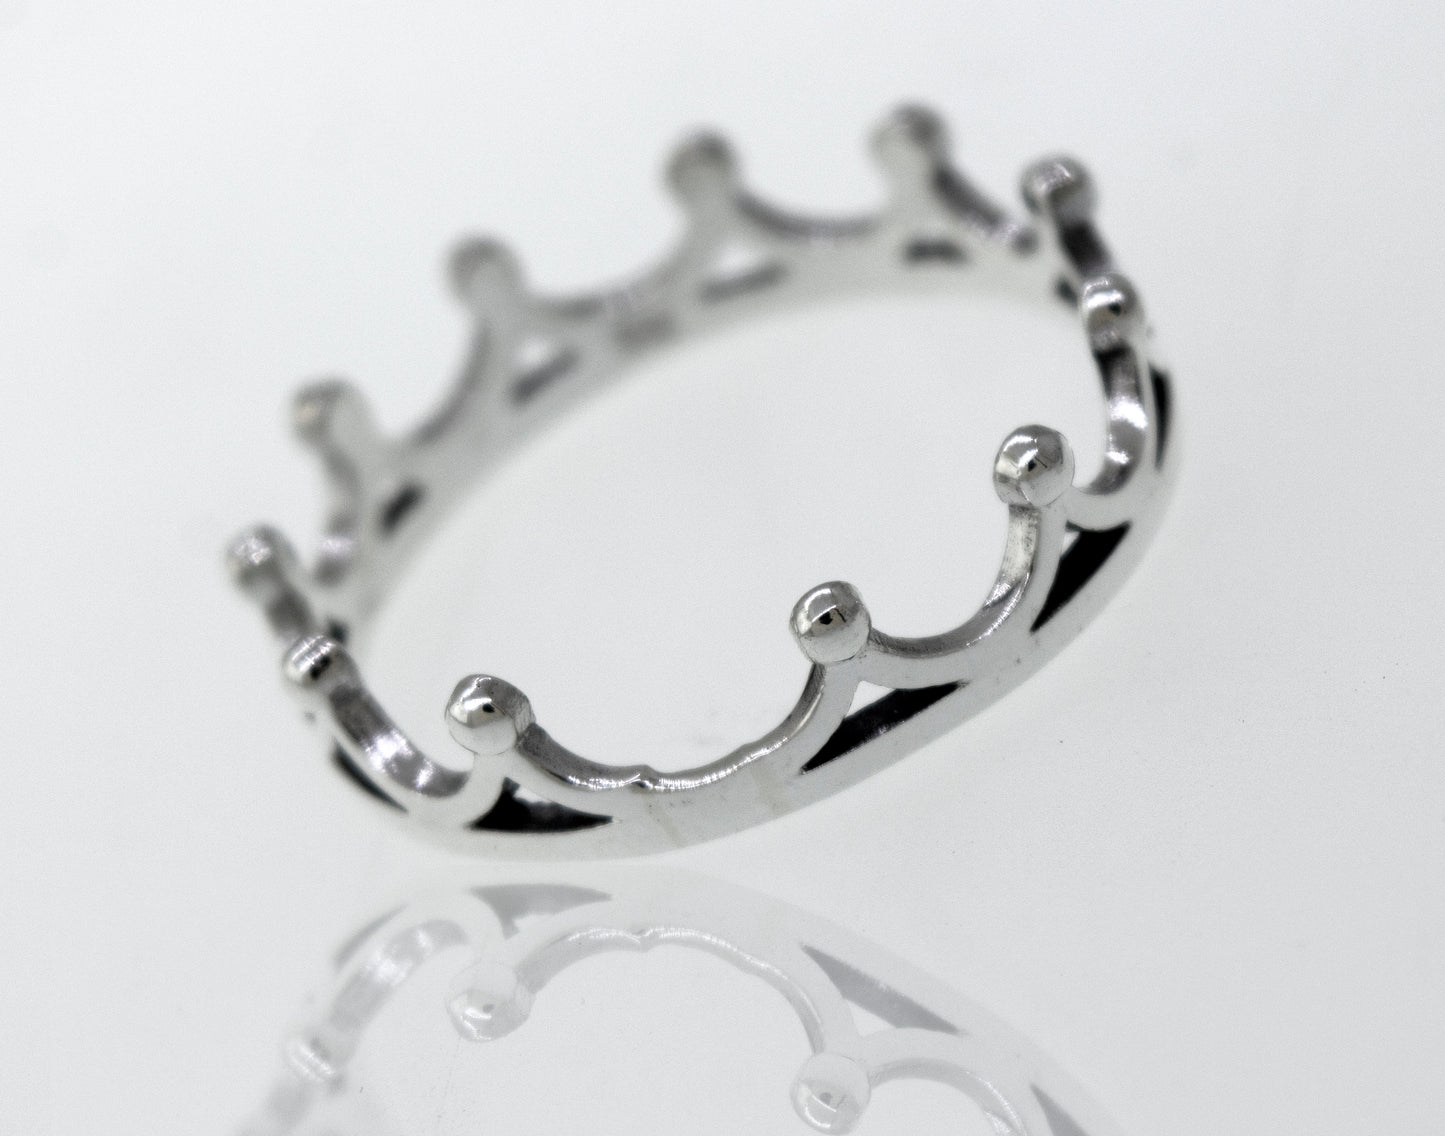 
                  
                    A Super Silver Sterling Silver Crown Ring with a high polish finish, resting on a white surface.
                  
                